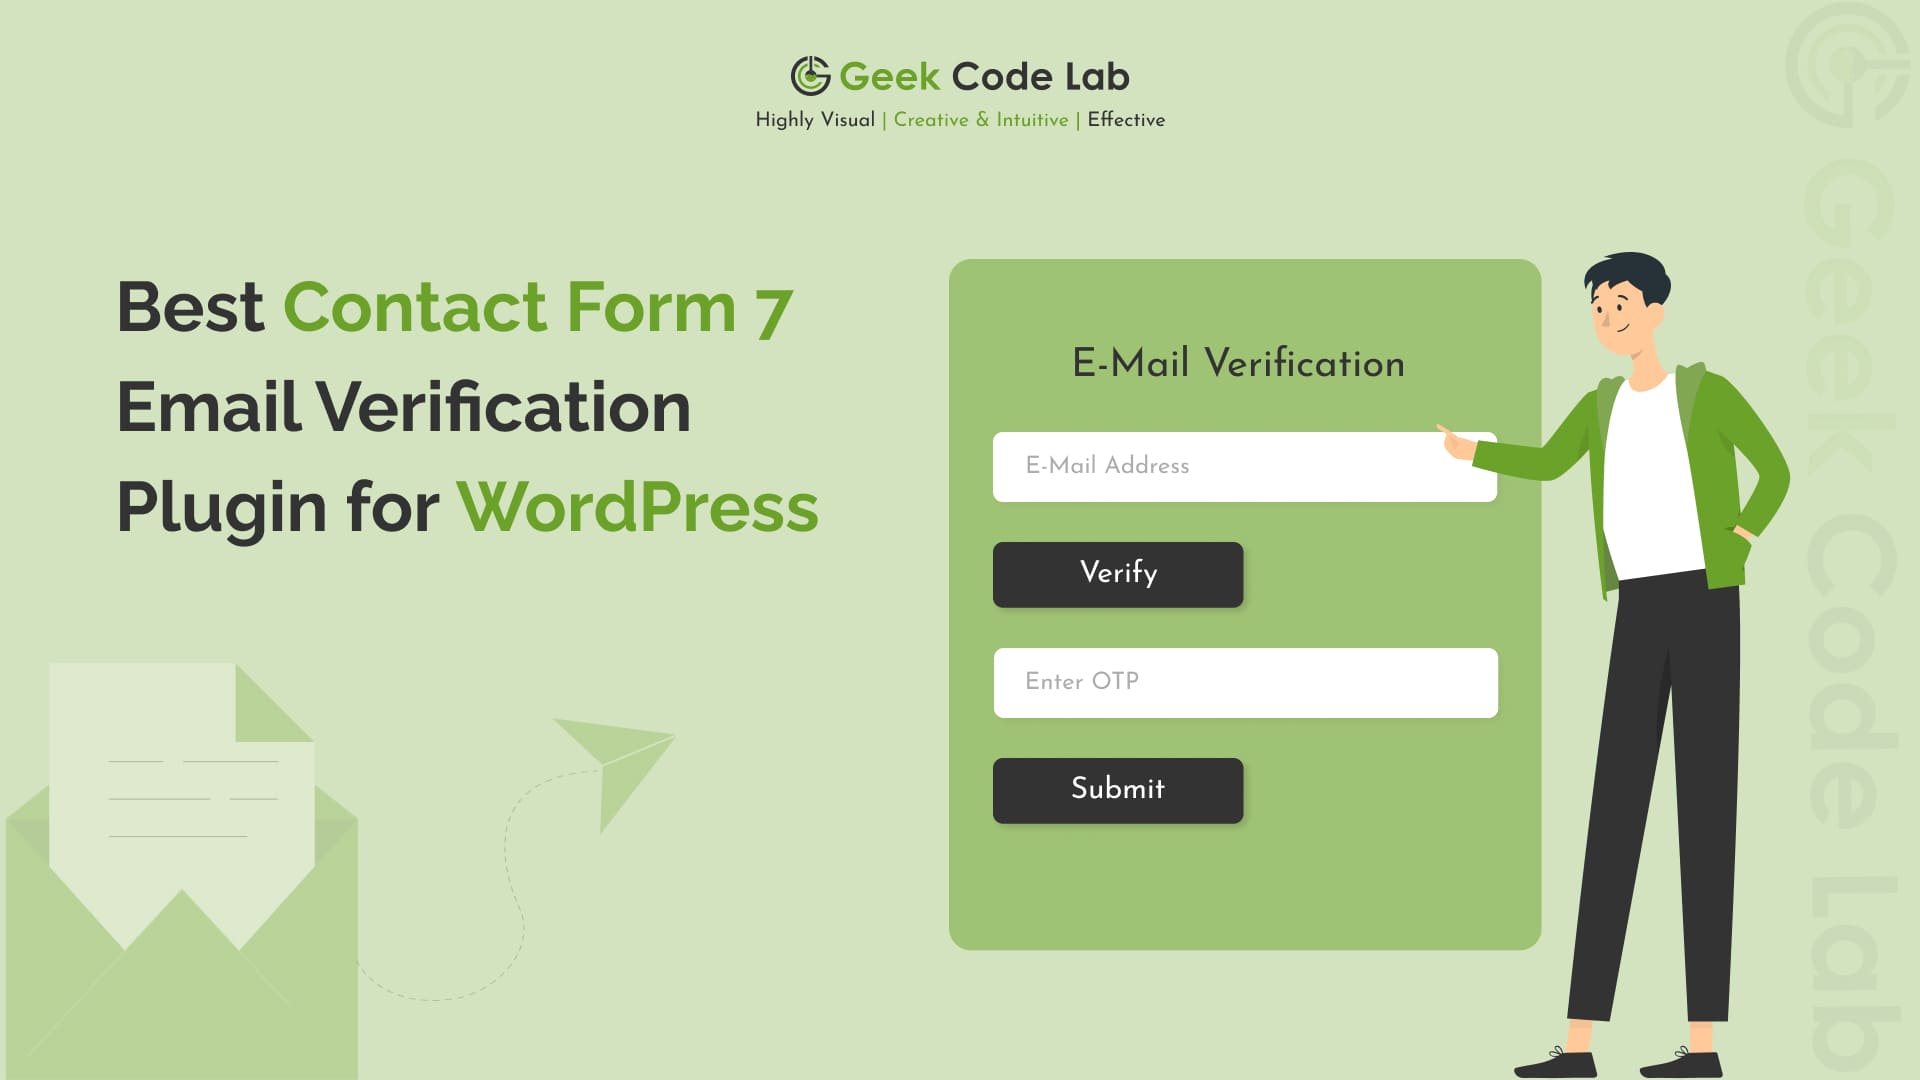 The Best Contact Form 7 Email Verification Plugin for WordPress